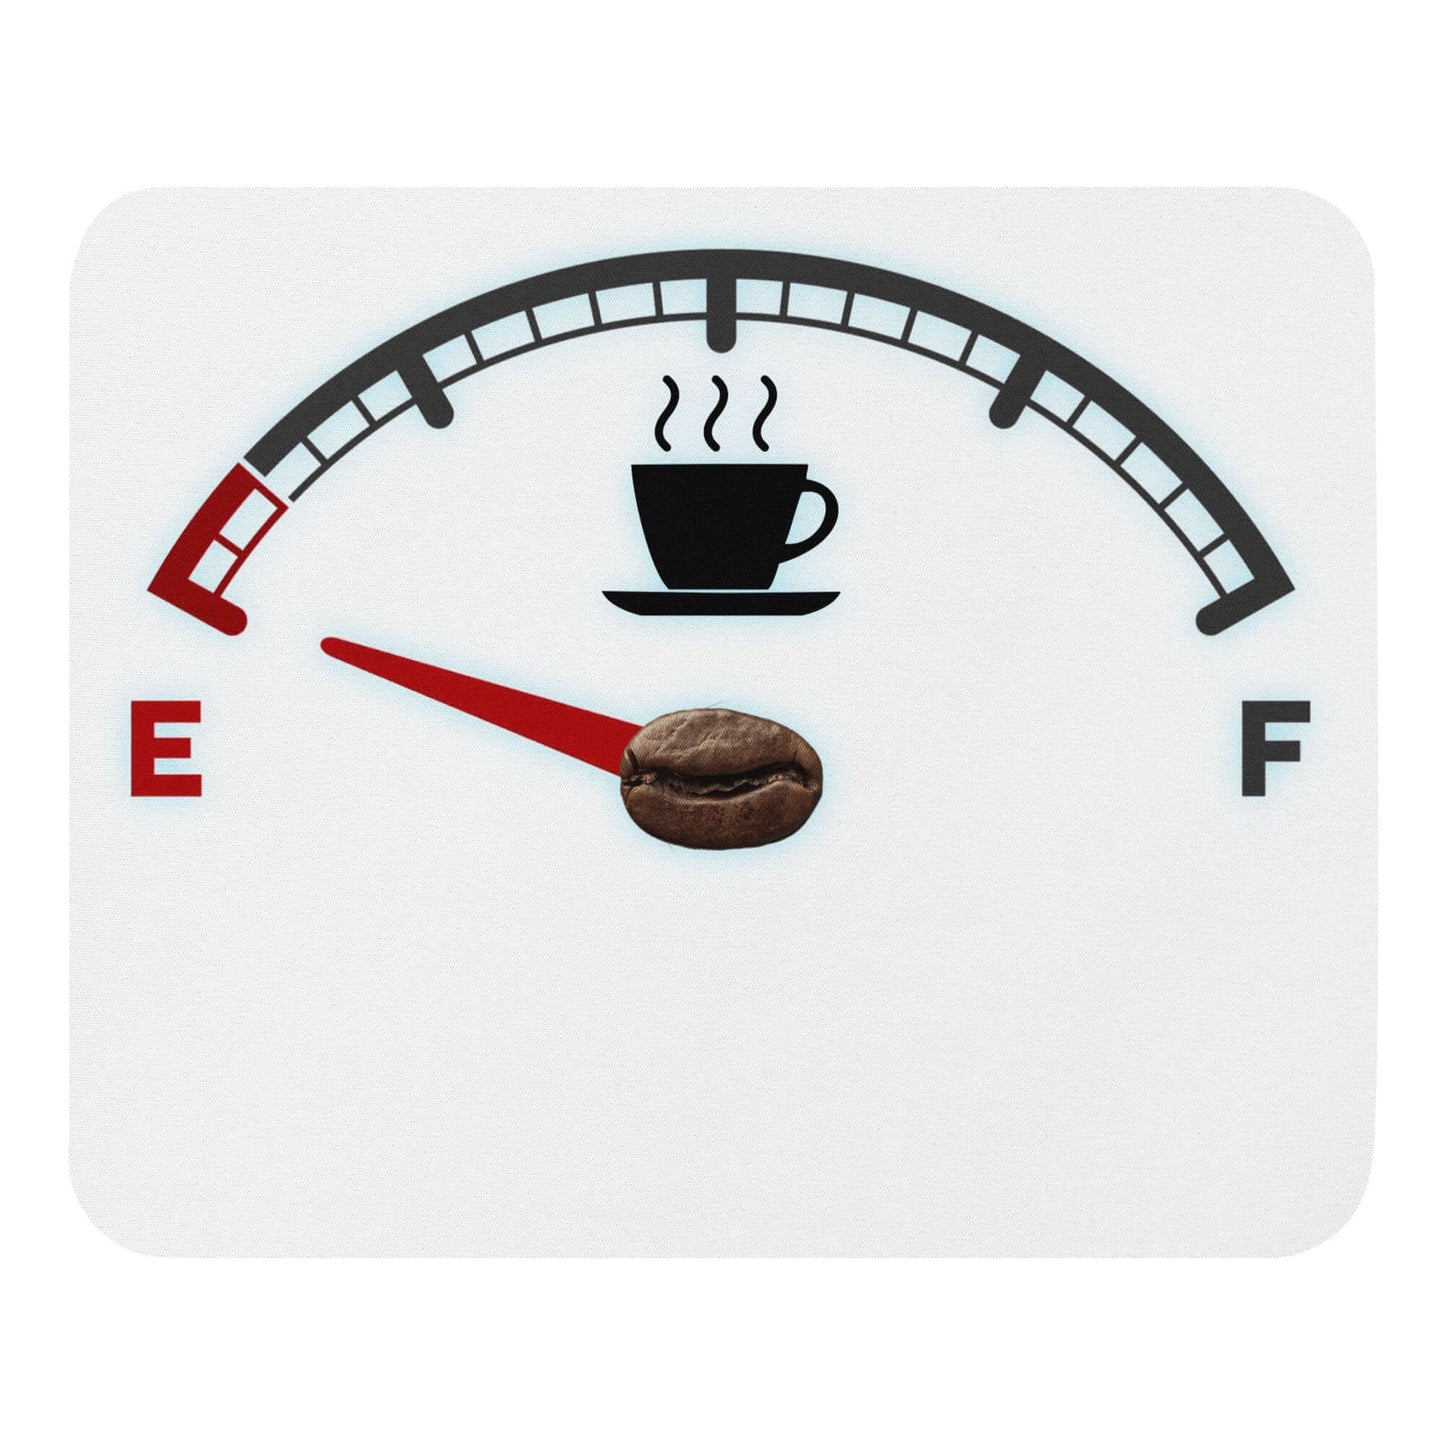 Running on empty, I NEED COFFEE! - Mouse pad - Horrible Designs